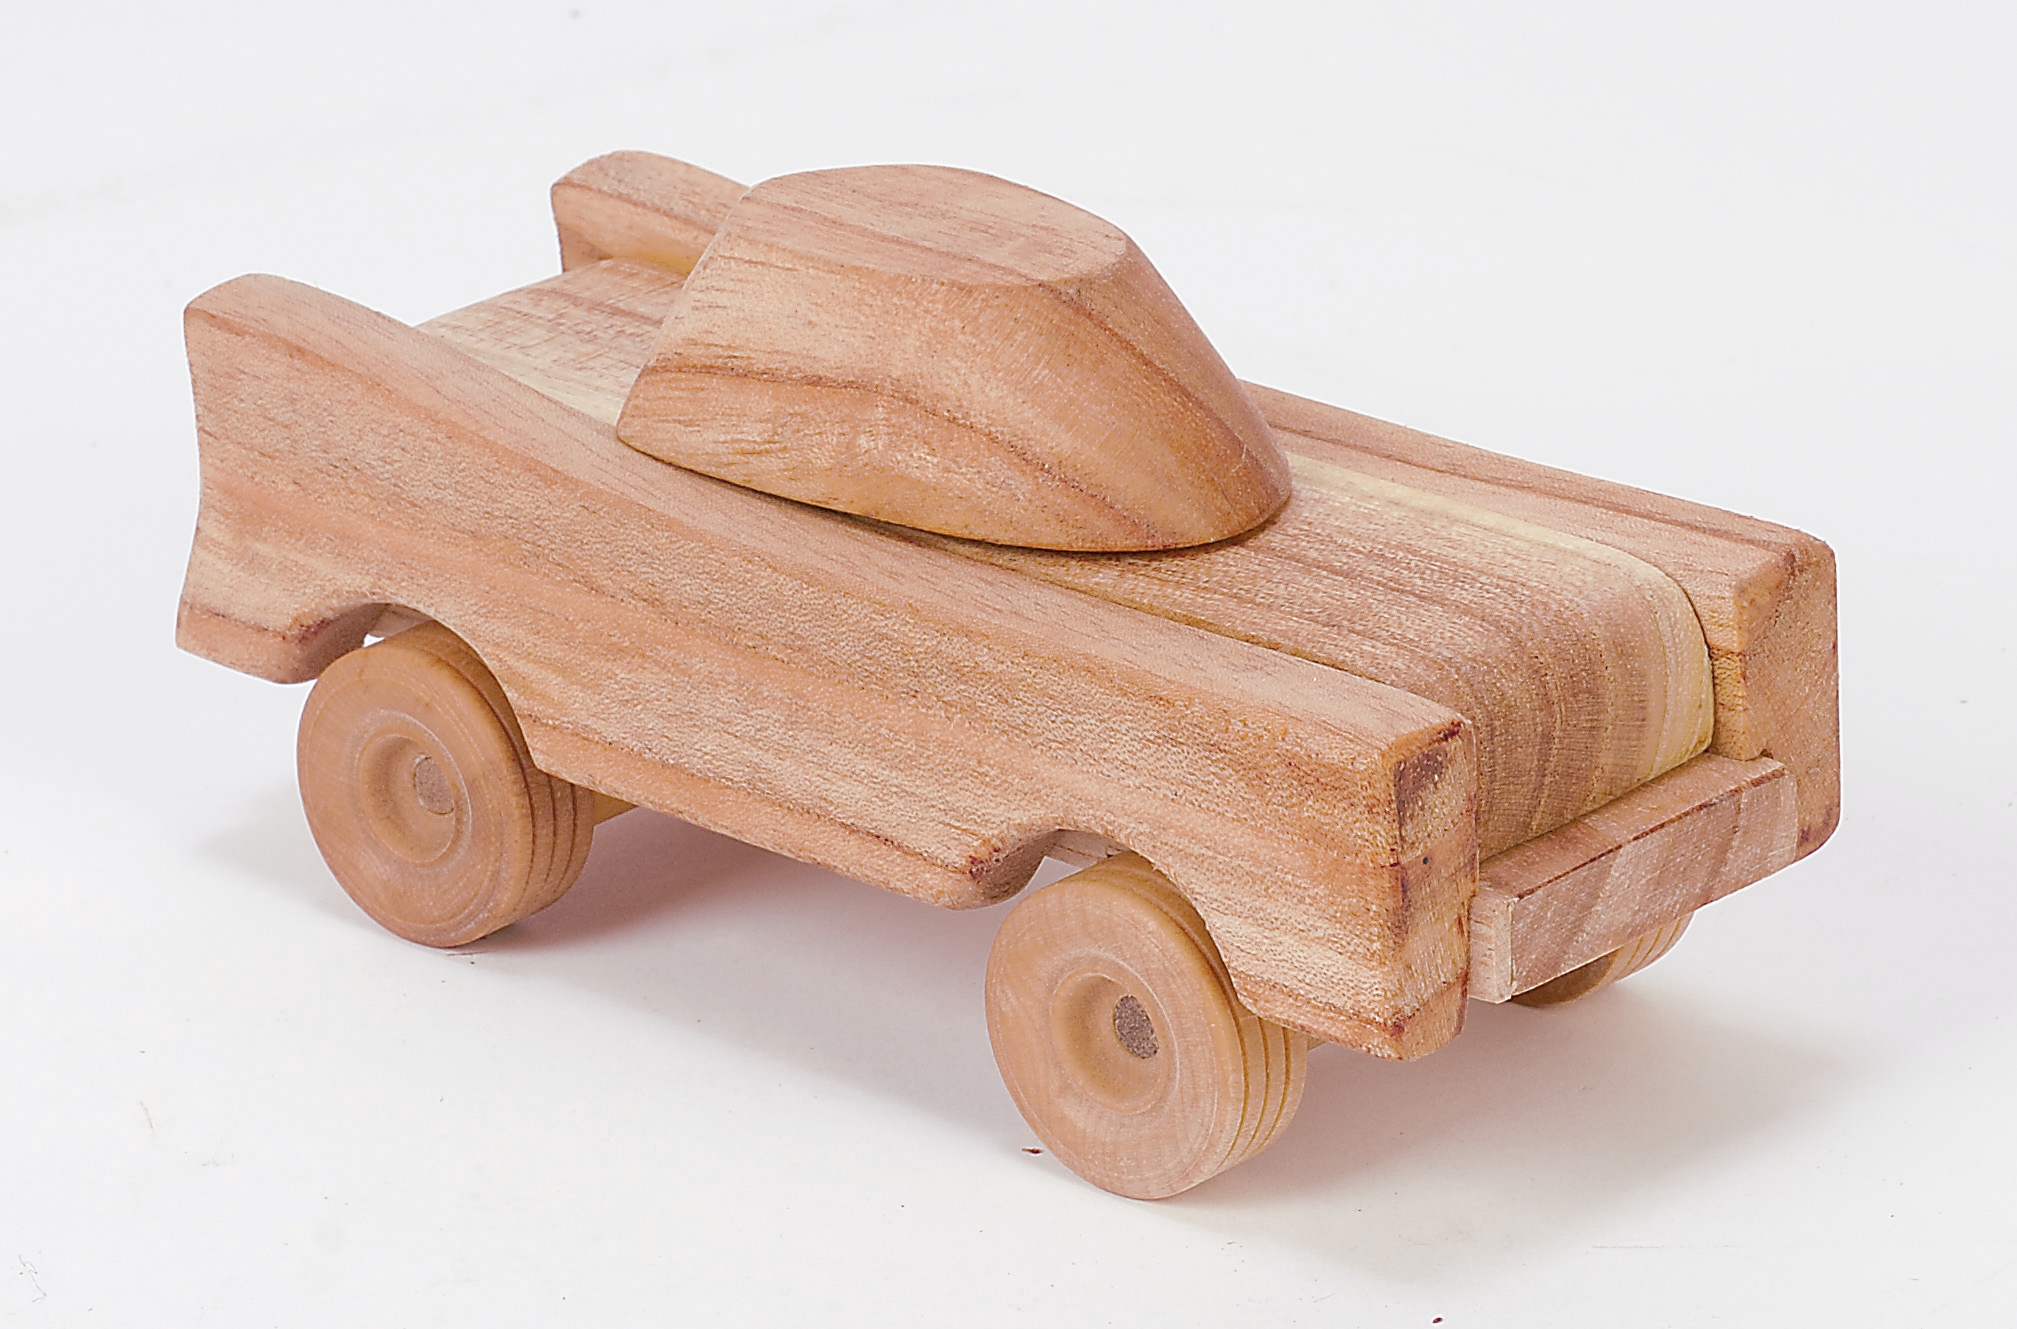 Tree blocks crash car is a sustainable, eco friendly toy made of natural wood.